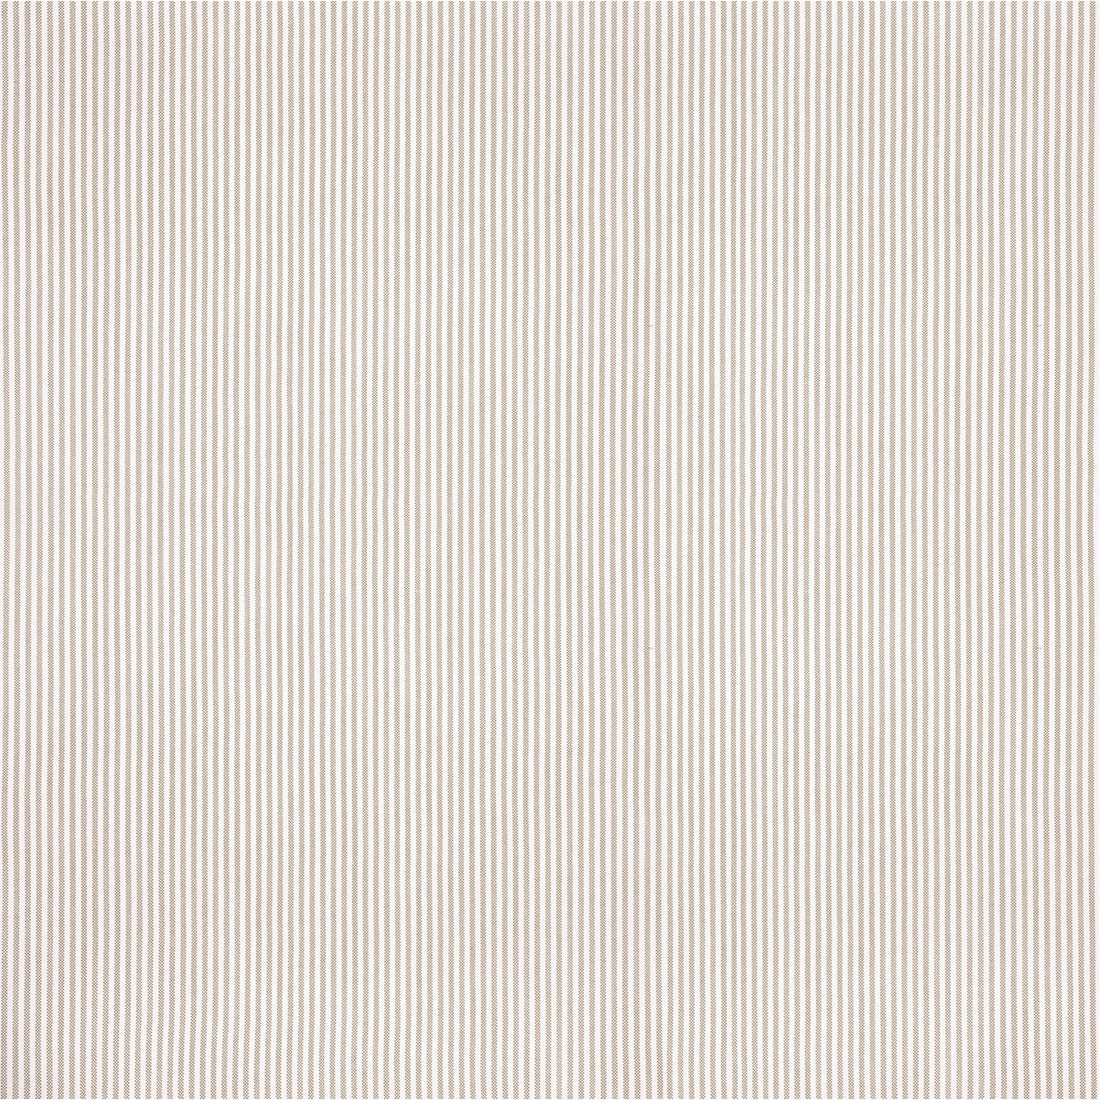 Laurence fabric in beige color - pattern GDT5386.7.0 - by Gaston y Daniela in the Gaston Africalia collection